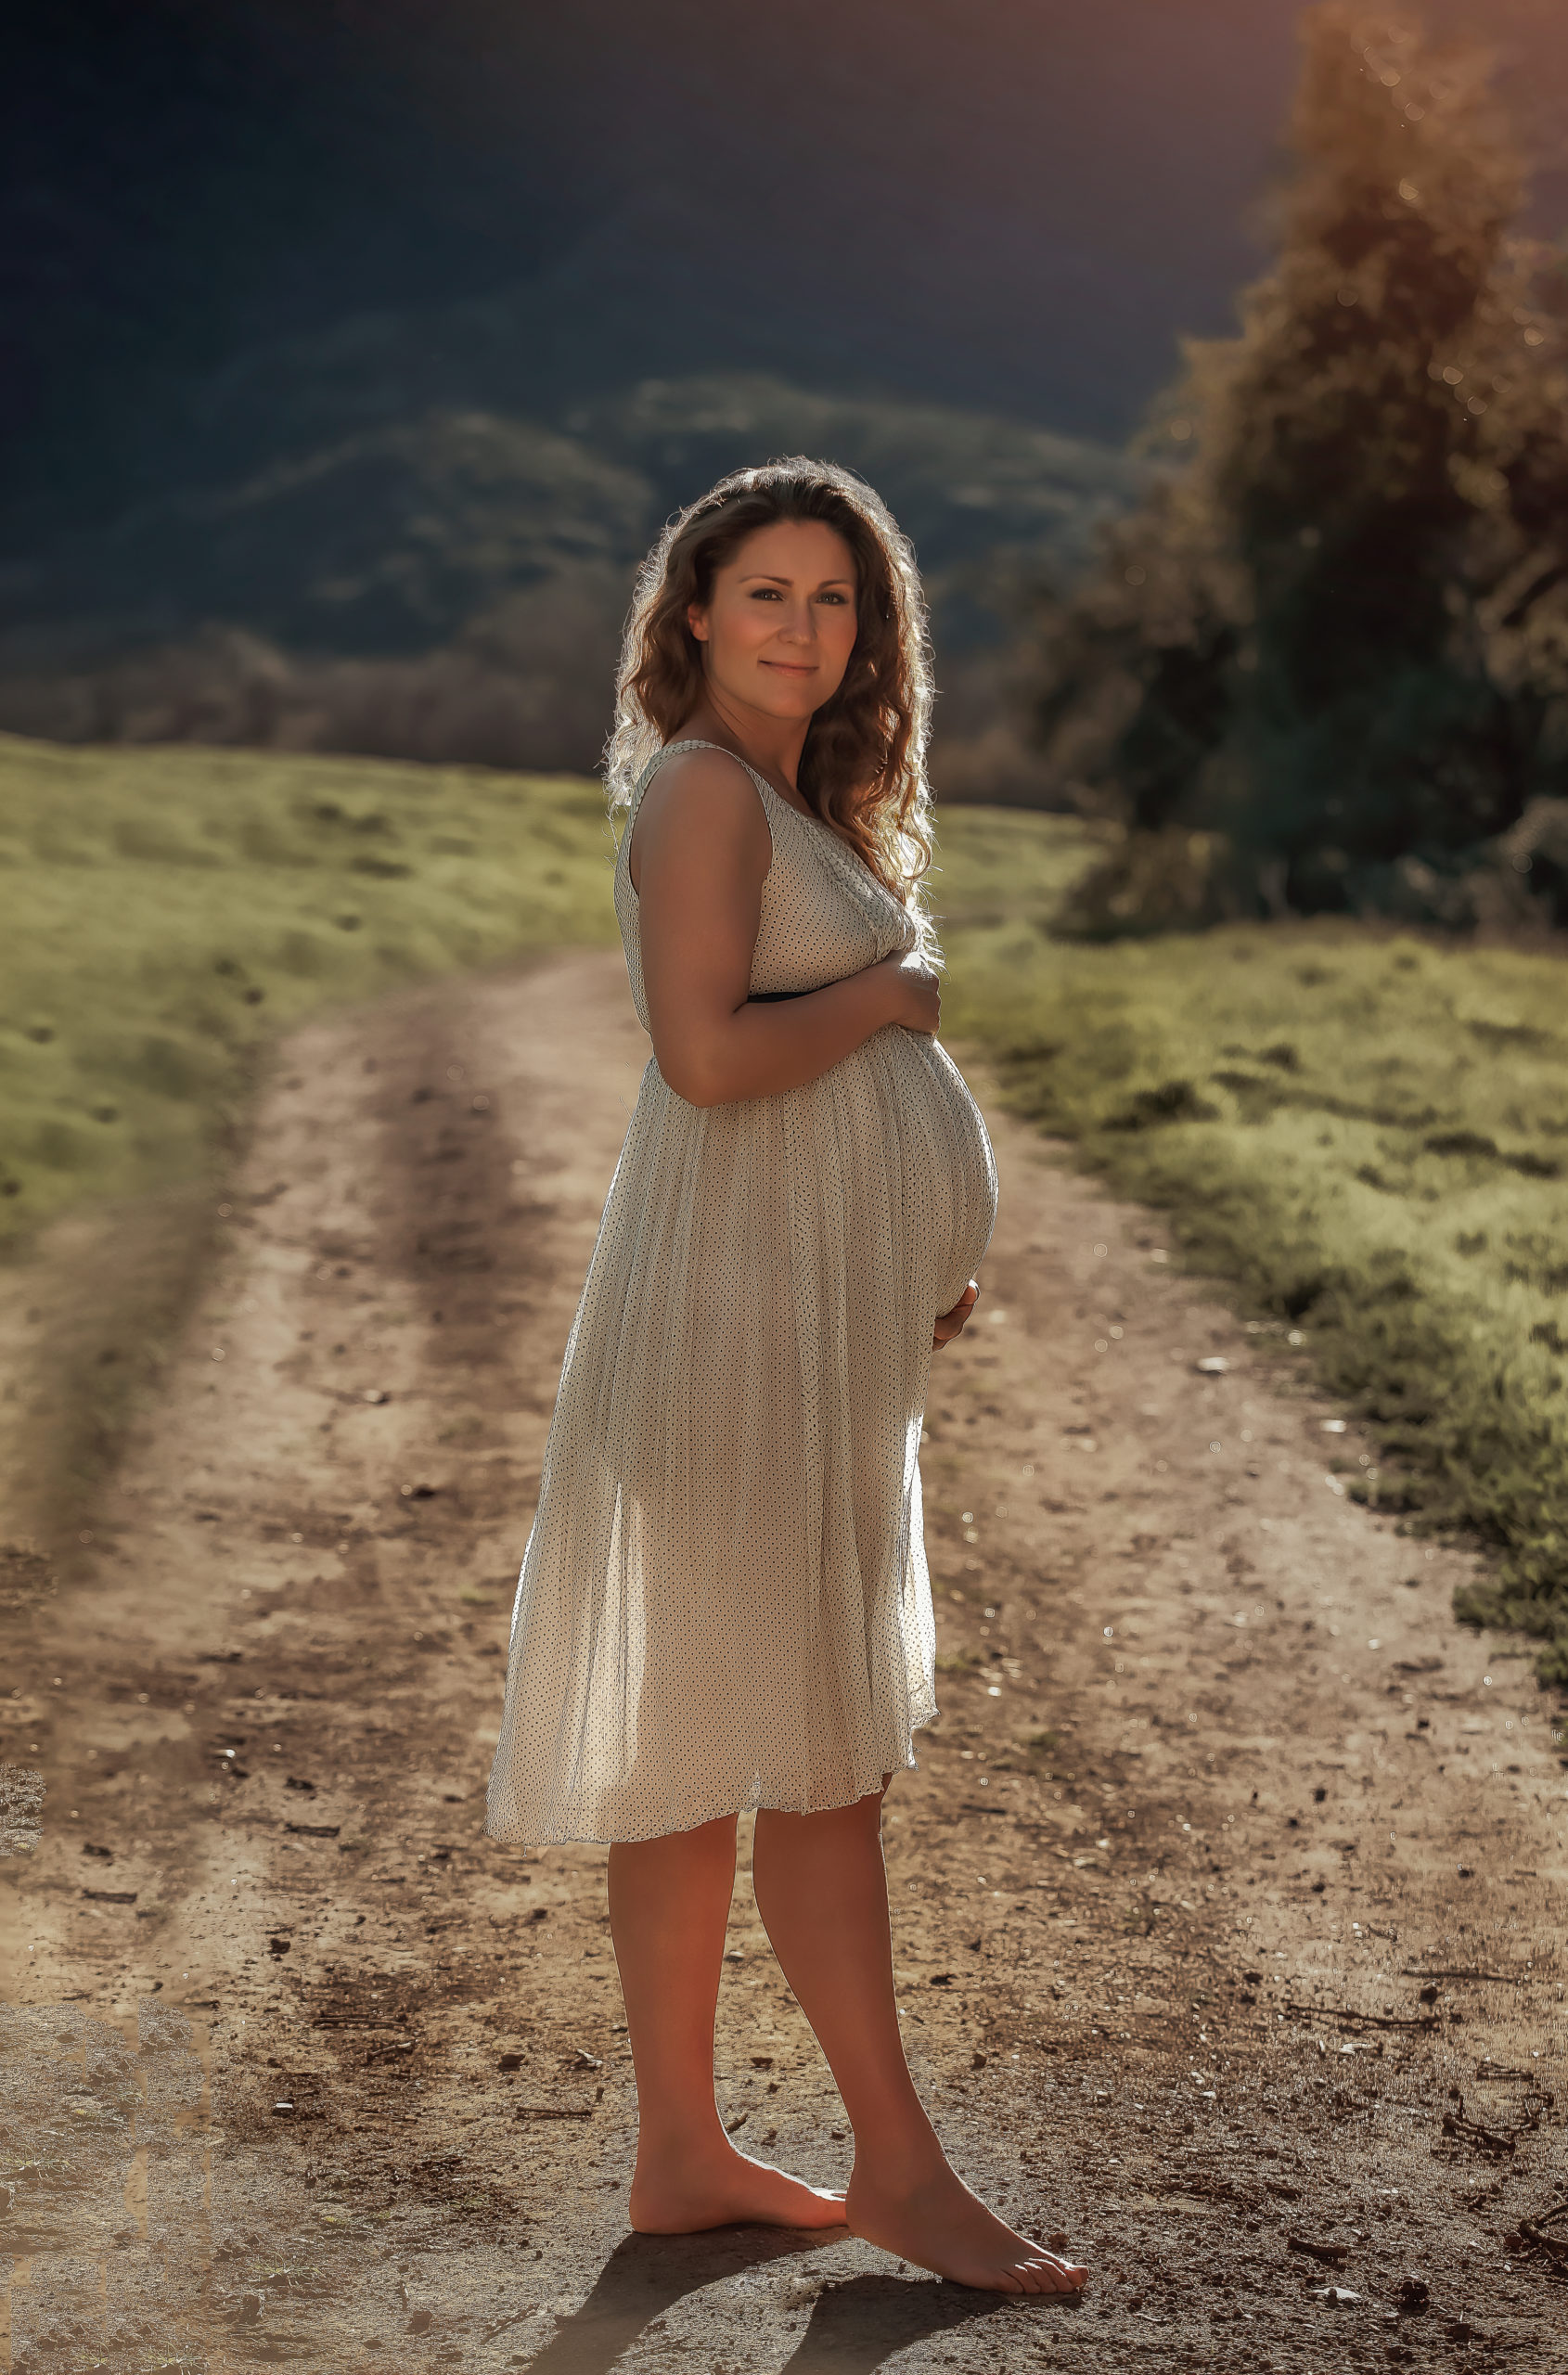 How to prepare for an outdoor maternity photo session